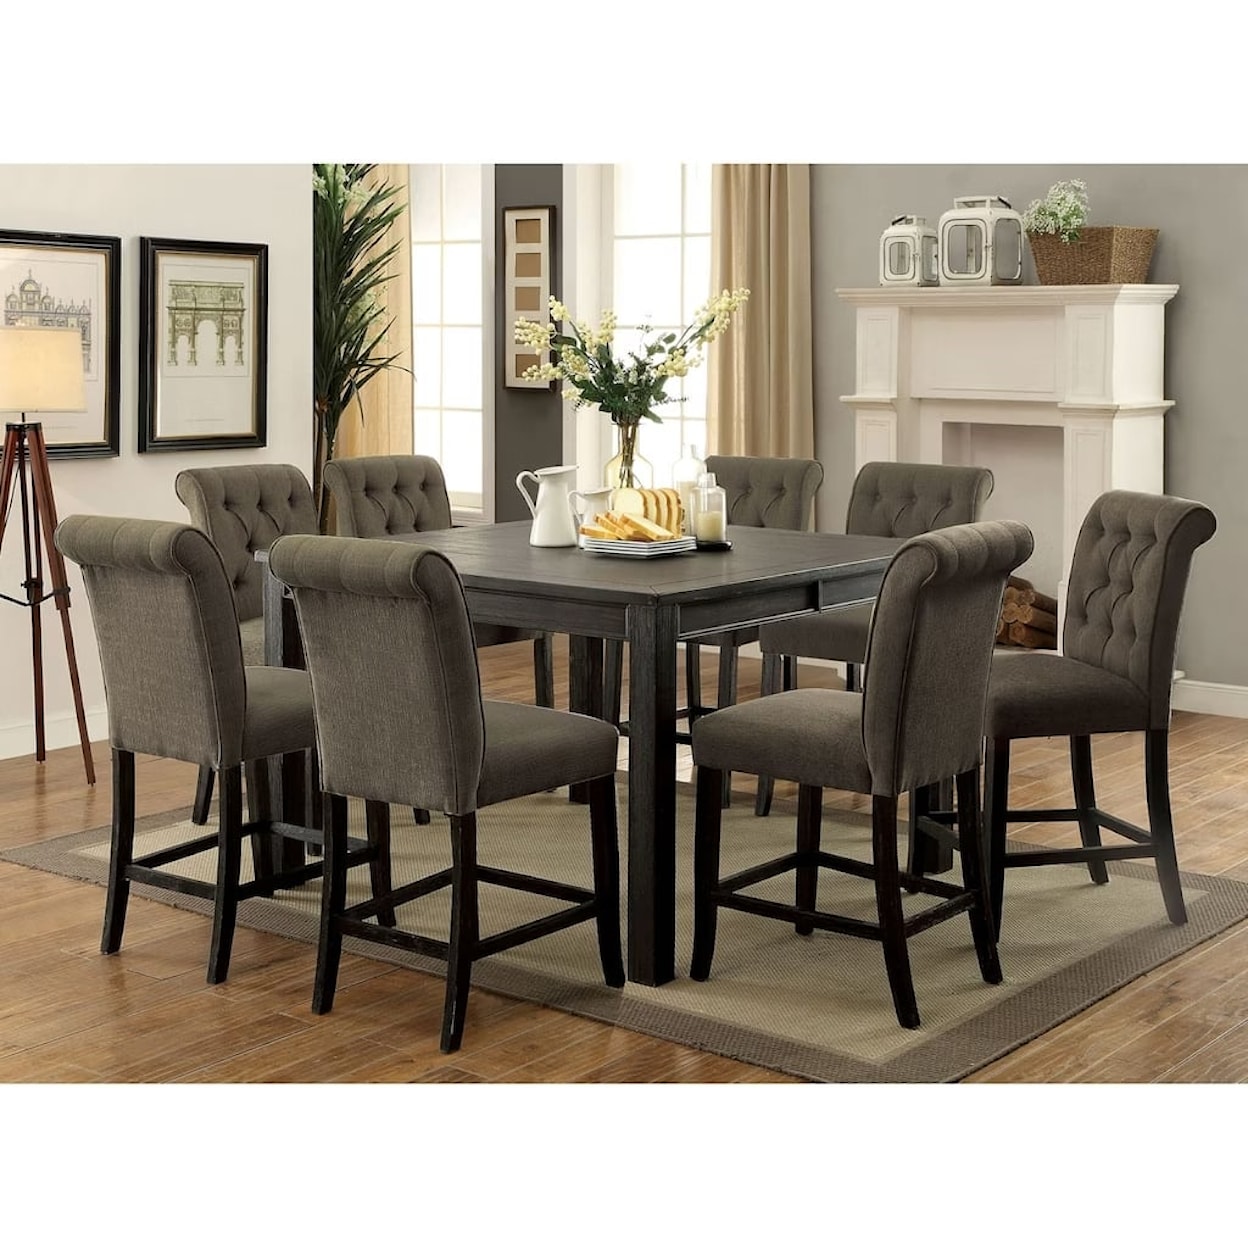 Furniture of America Sania III 7-Piece Counter Height Table and Chair Set